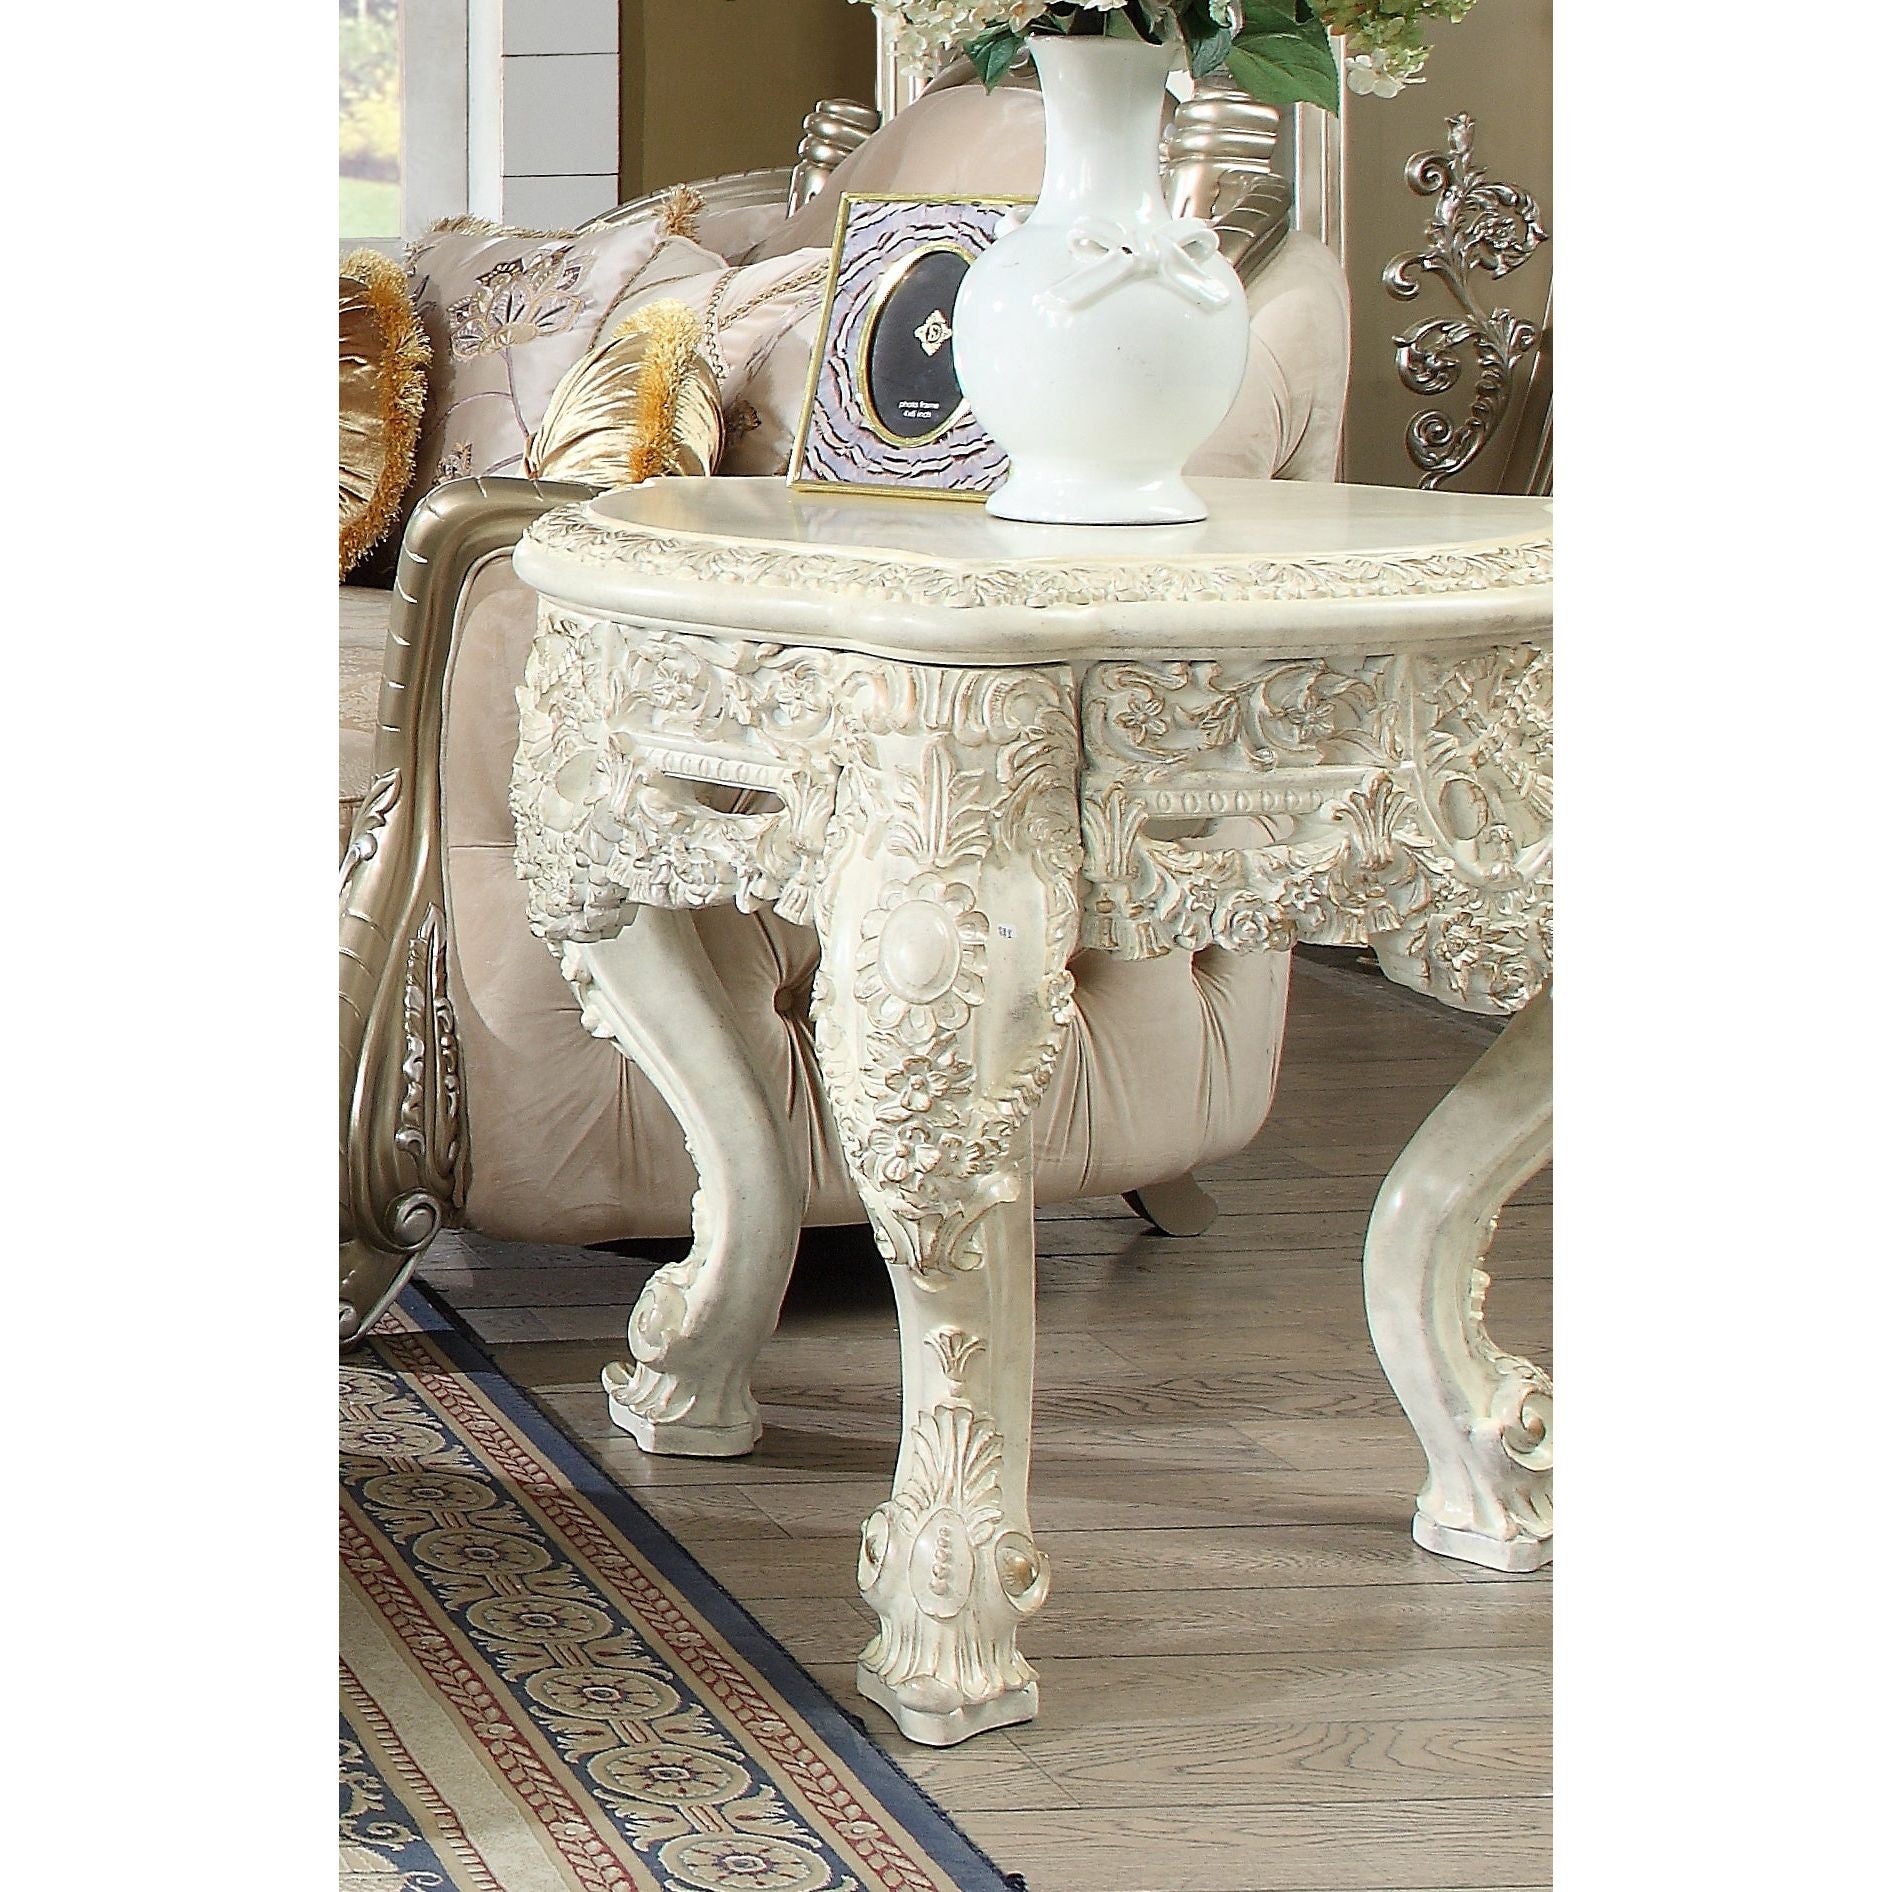 Homey Design HD-8030 - END TABLE - New Star Living